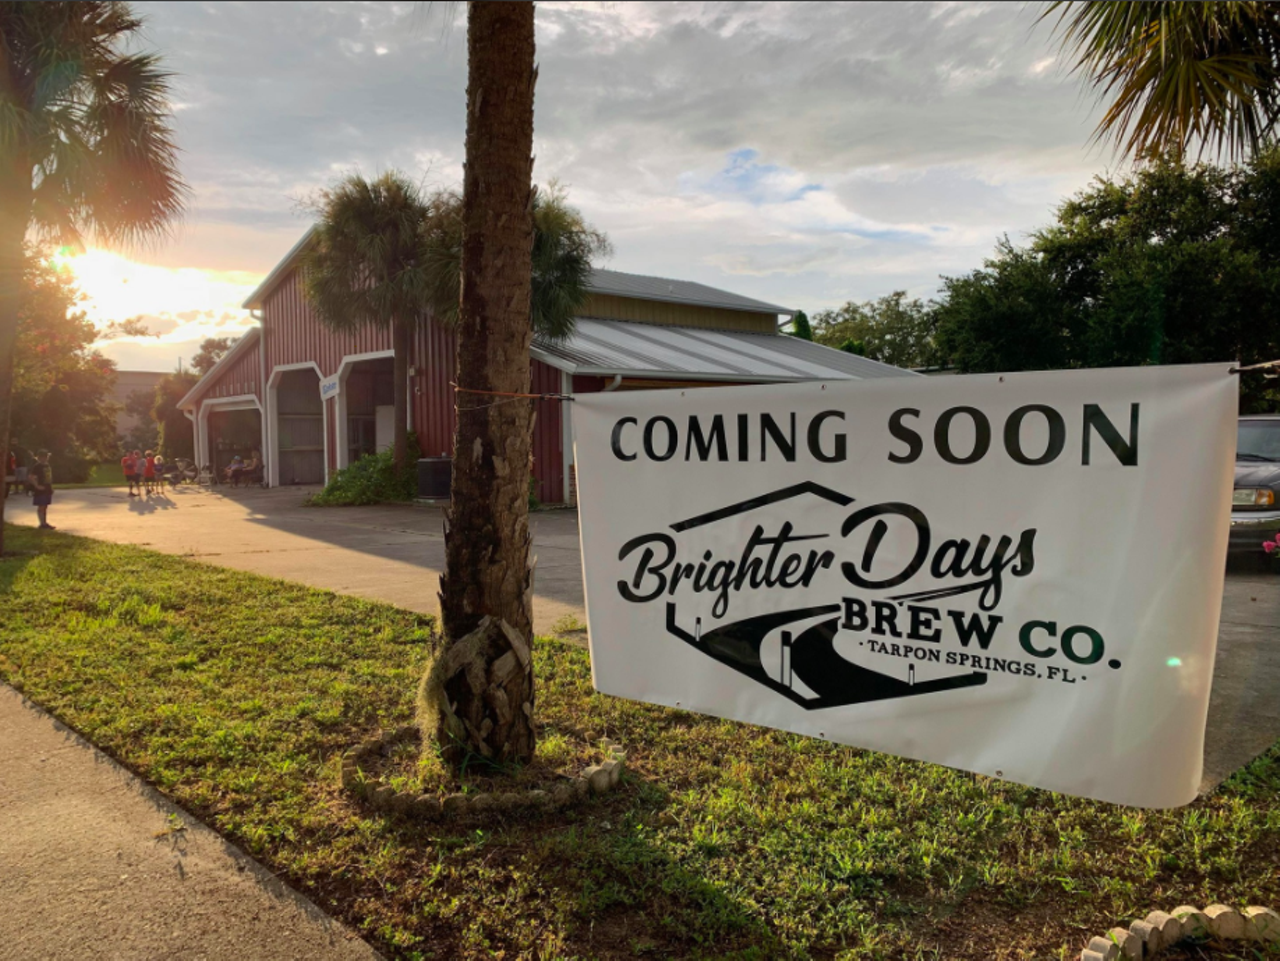 Brighter Days Brewing Co.  
311 N. Safford Ave., Tarpon Springs
Tarpon Springs is getting its newest brewery with Brighter Days Brewing Co. First announcing its opening late last year, the spot is set to open its doors to Tampa&#146;s brew lovers soon.
Photo via Brighter Days Brewing Co./Facebook